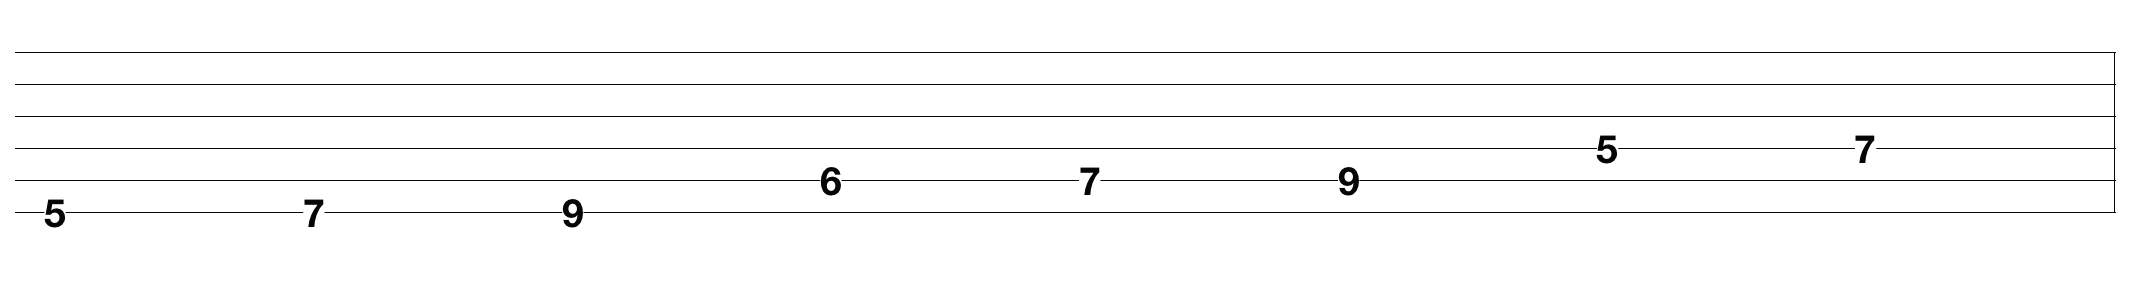 melodic-guitar-scales_4.png